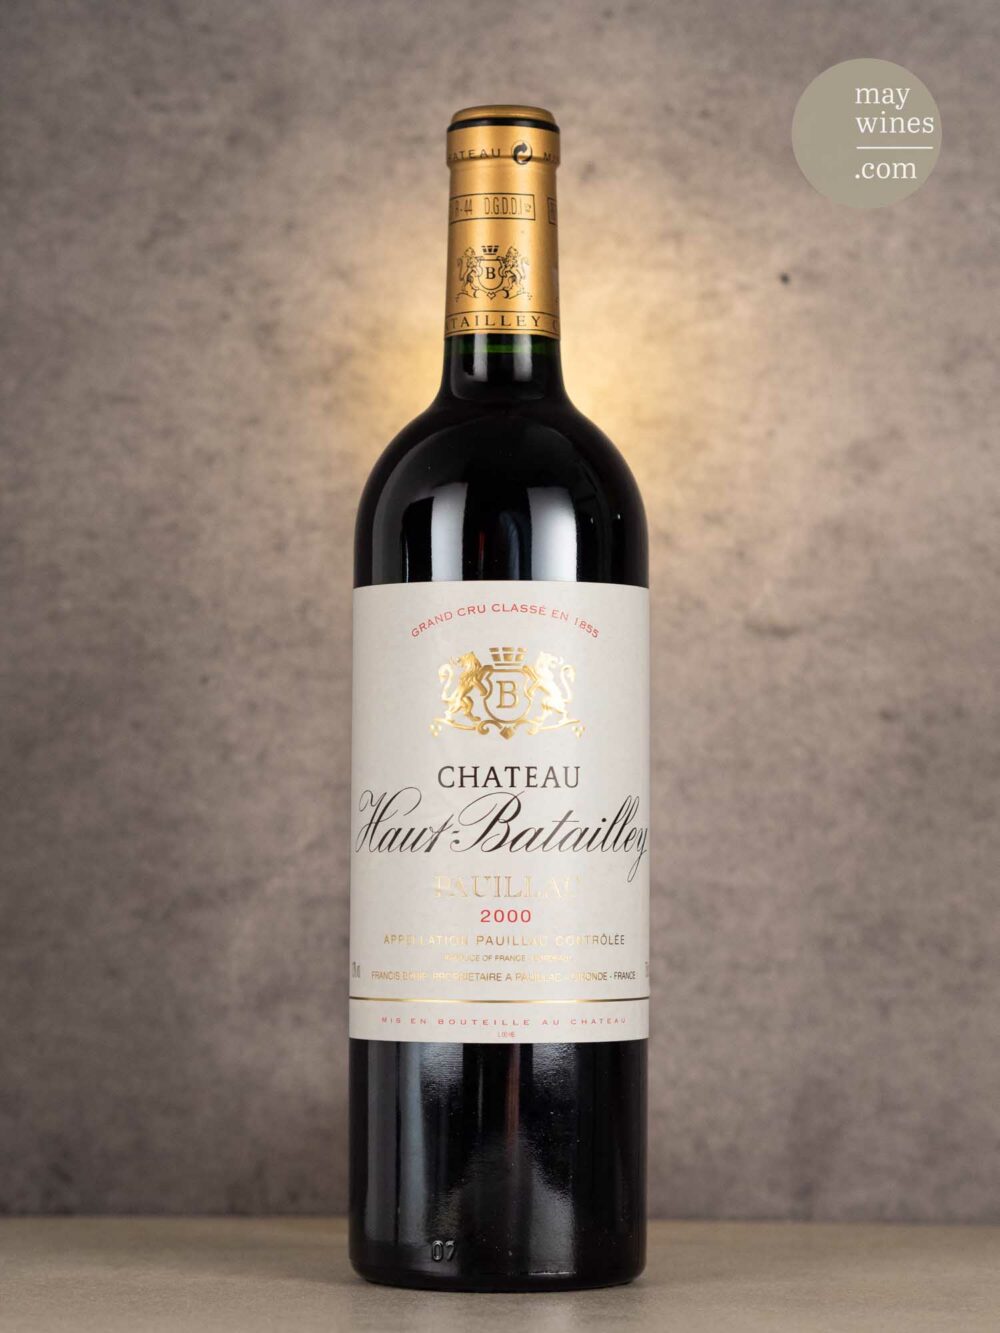 May Wines – Rotwein – 2000 Château Haut-Batailley